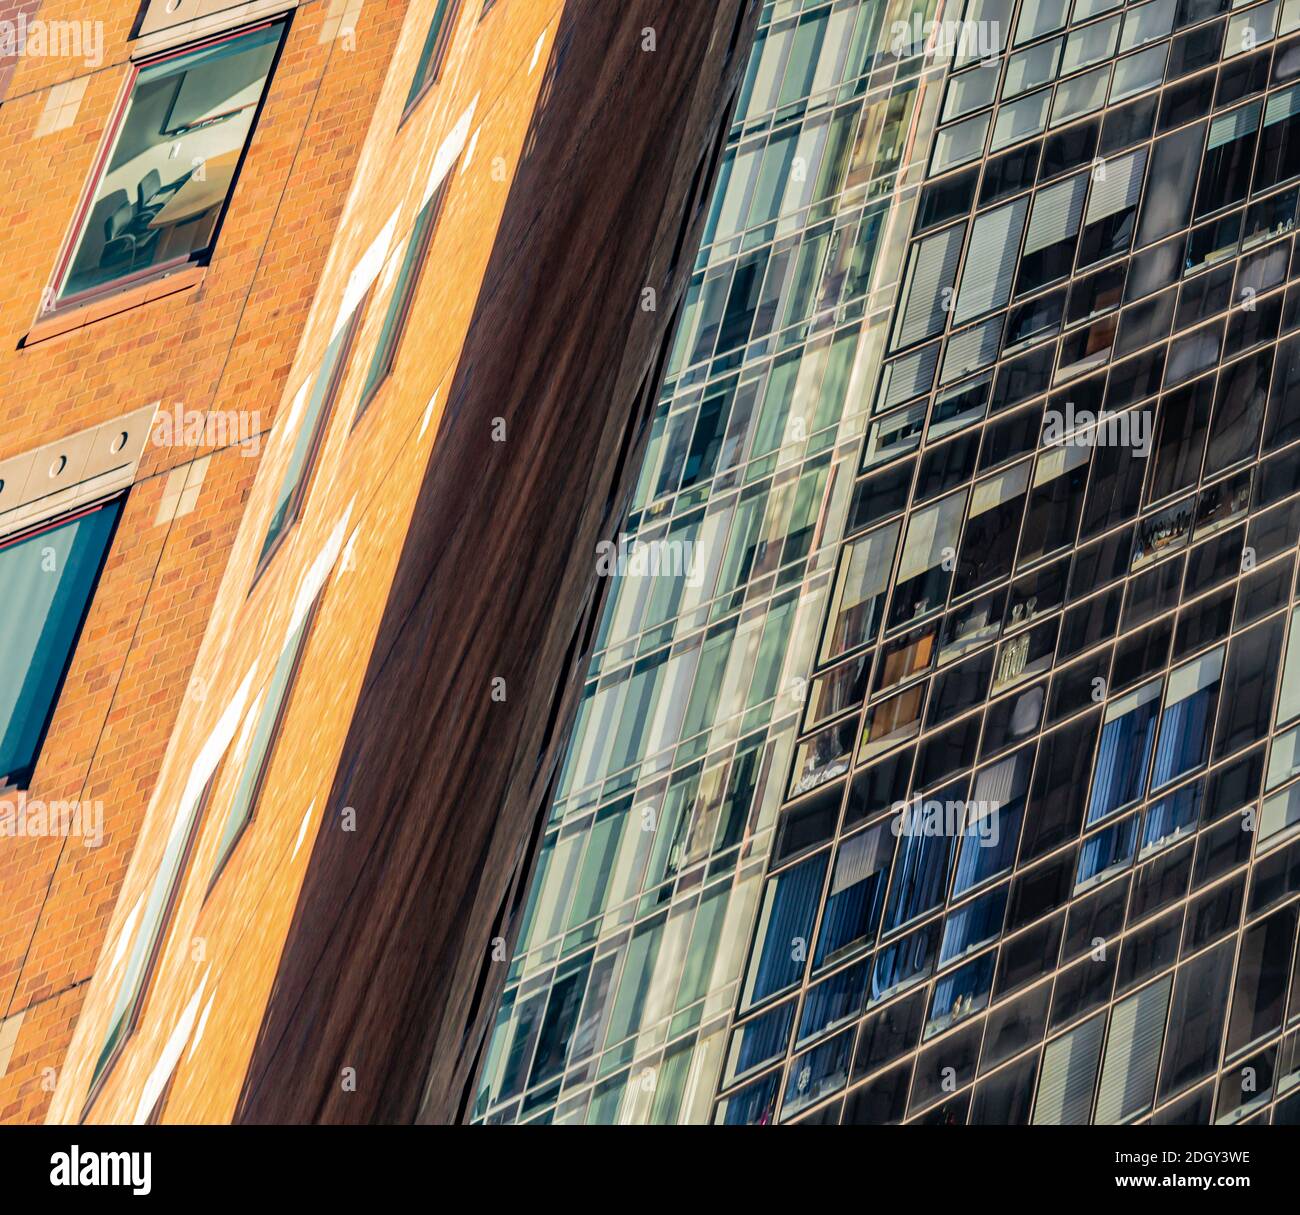 distorted detail image of two manhattan buildings in NYC Stock Photo